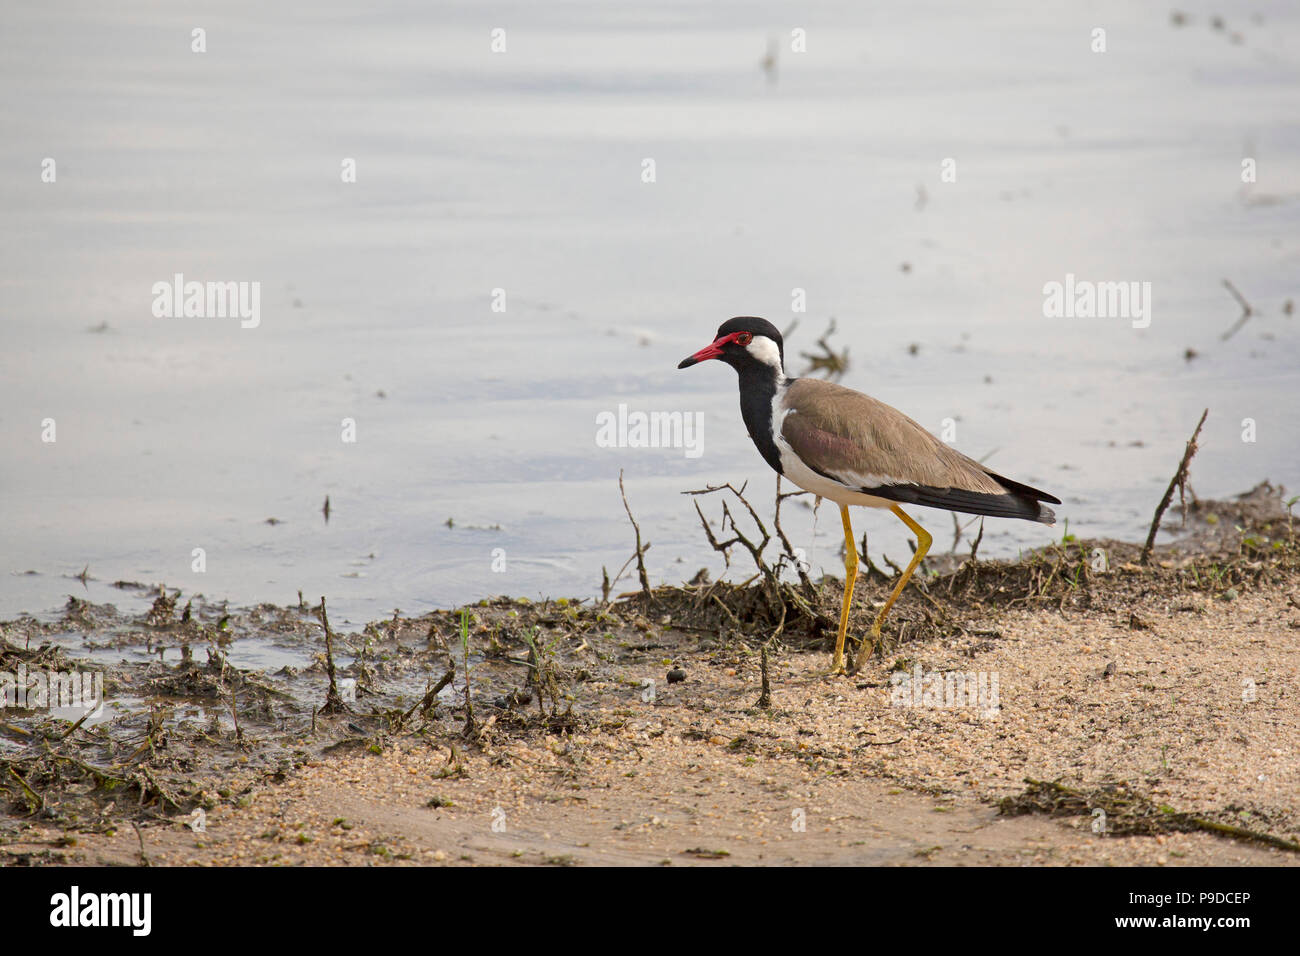 A red-wattled lapwing (Vanellus indicus), also known as the woolly-necked stork, in Minneriya National Park in Sri Lanka. The waterbird stalks along t Stock Photo